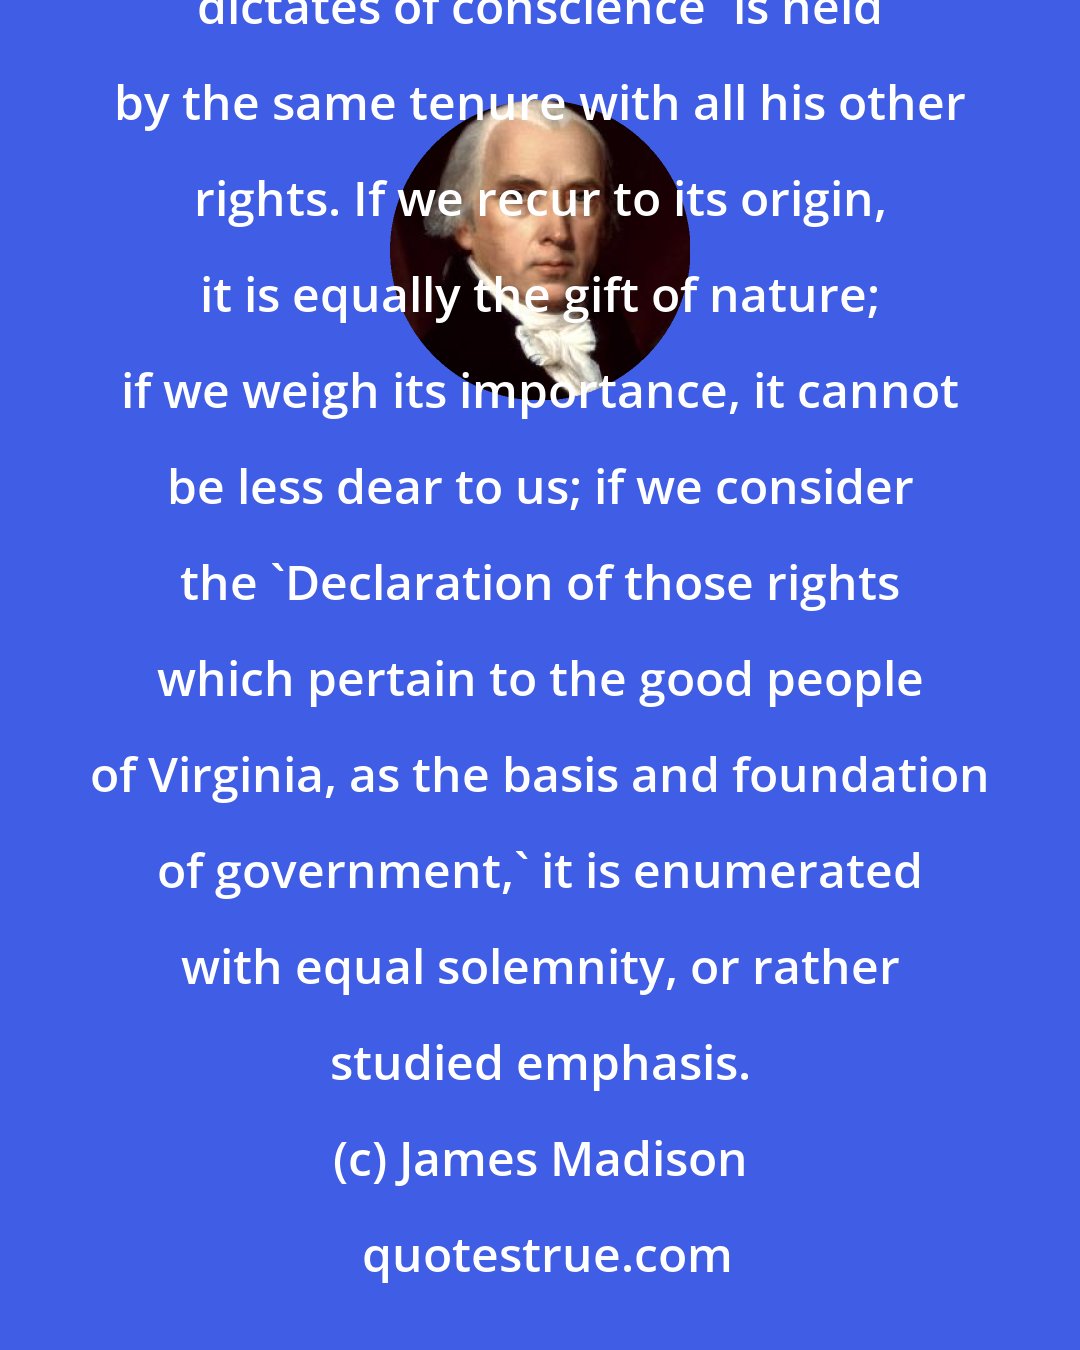 James Madison: Because finally, 'the equal right of every citizen to the free exercise of his religion according to the dictates of conscience' is held by the same tenure with all his other rights. If we recur to its origin, it is equally the gift of nature; if we weigh its importance, it cannot be less dear to us; if we consider the 'Declaration of those rights which pertain to the good people of Virginia, as the basis and foundation of government,' it is enumerated with equal solemnity, or rather studied emphasis.